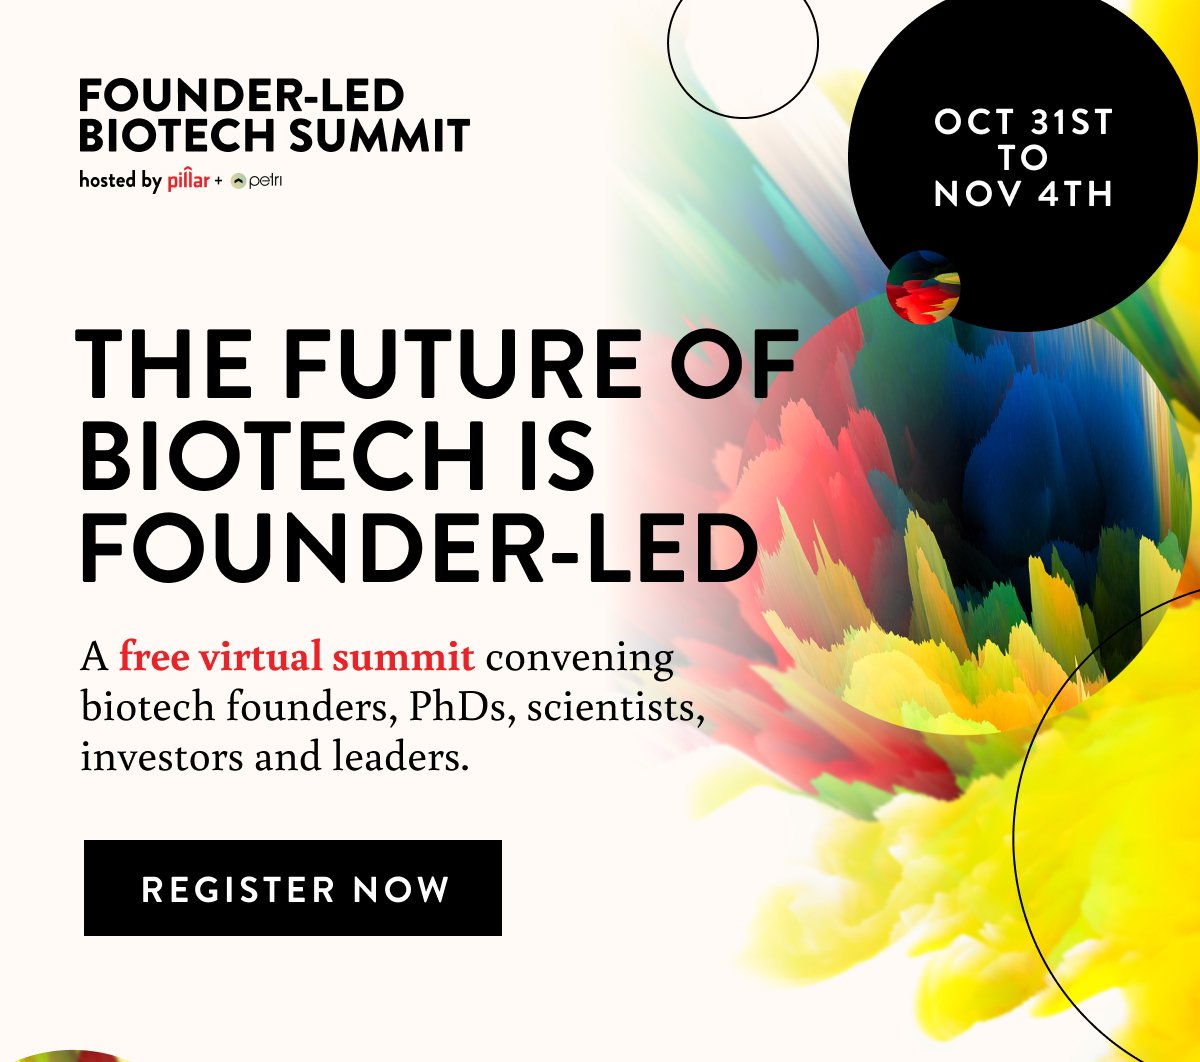 Founder-Led Biotech Summit Oct 31 to Nov 4th